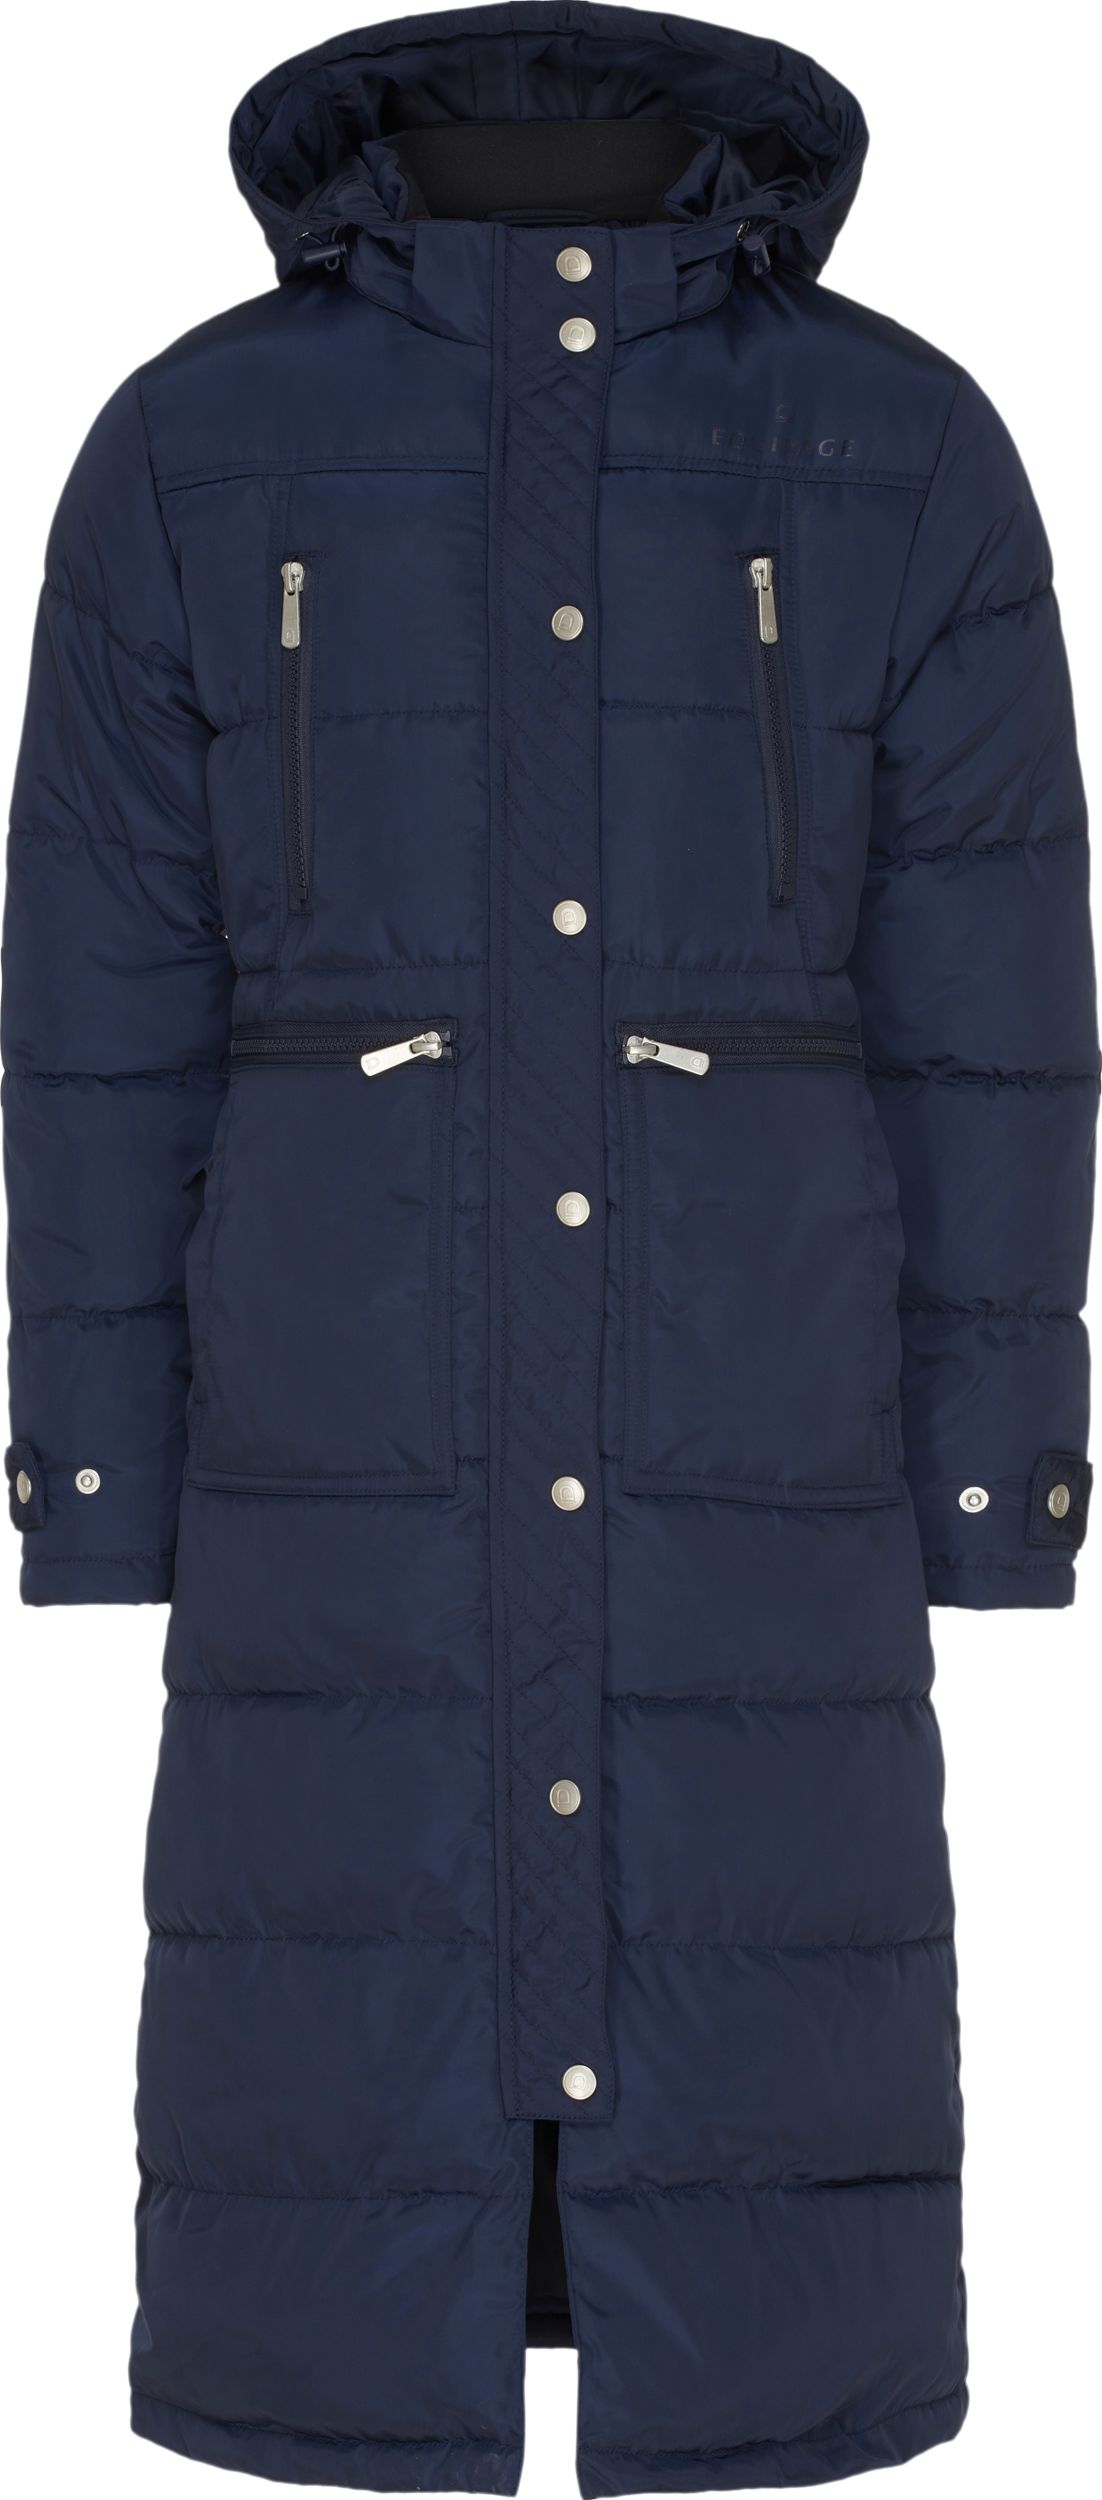 EQUIPAGE, CANDICE LONG JACKET JR